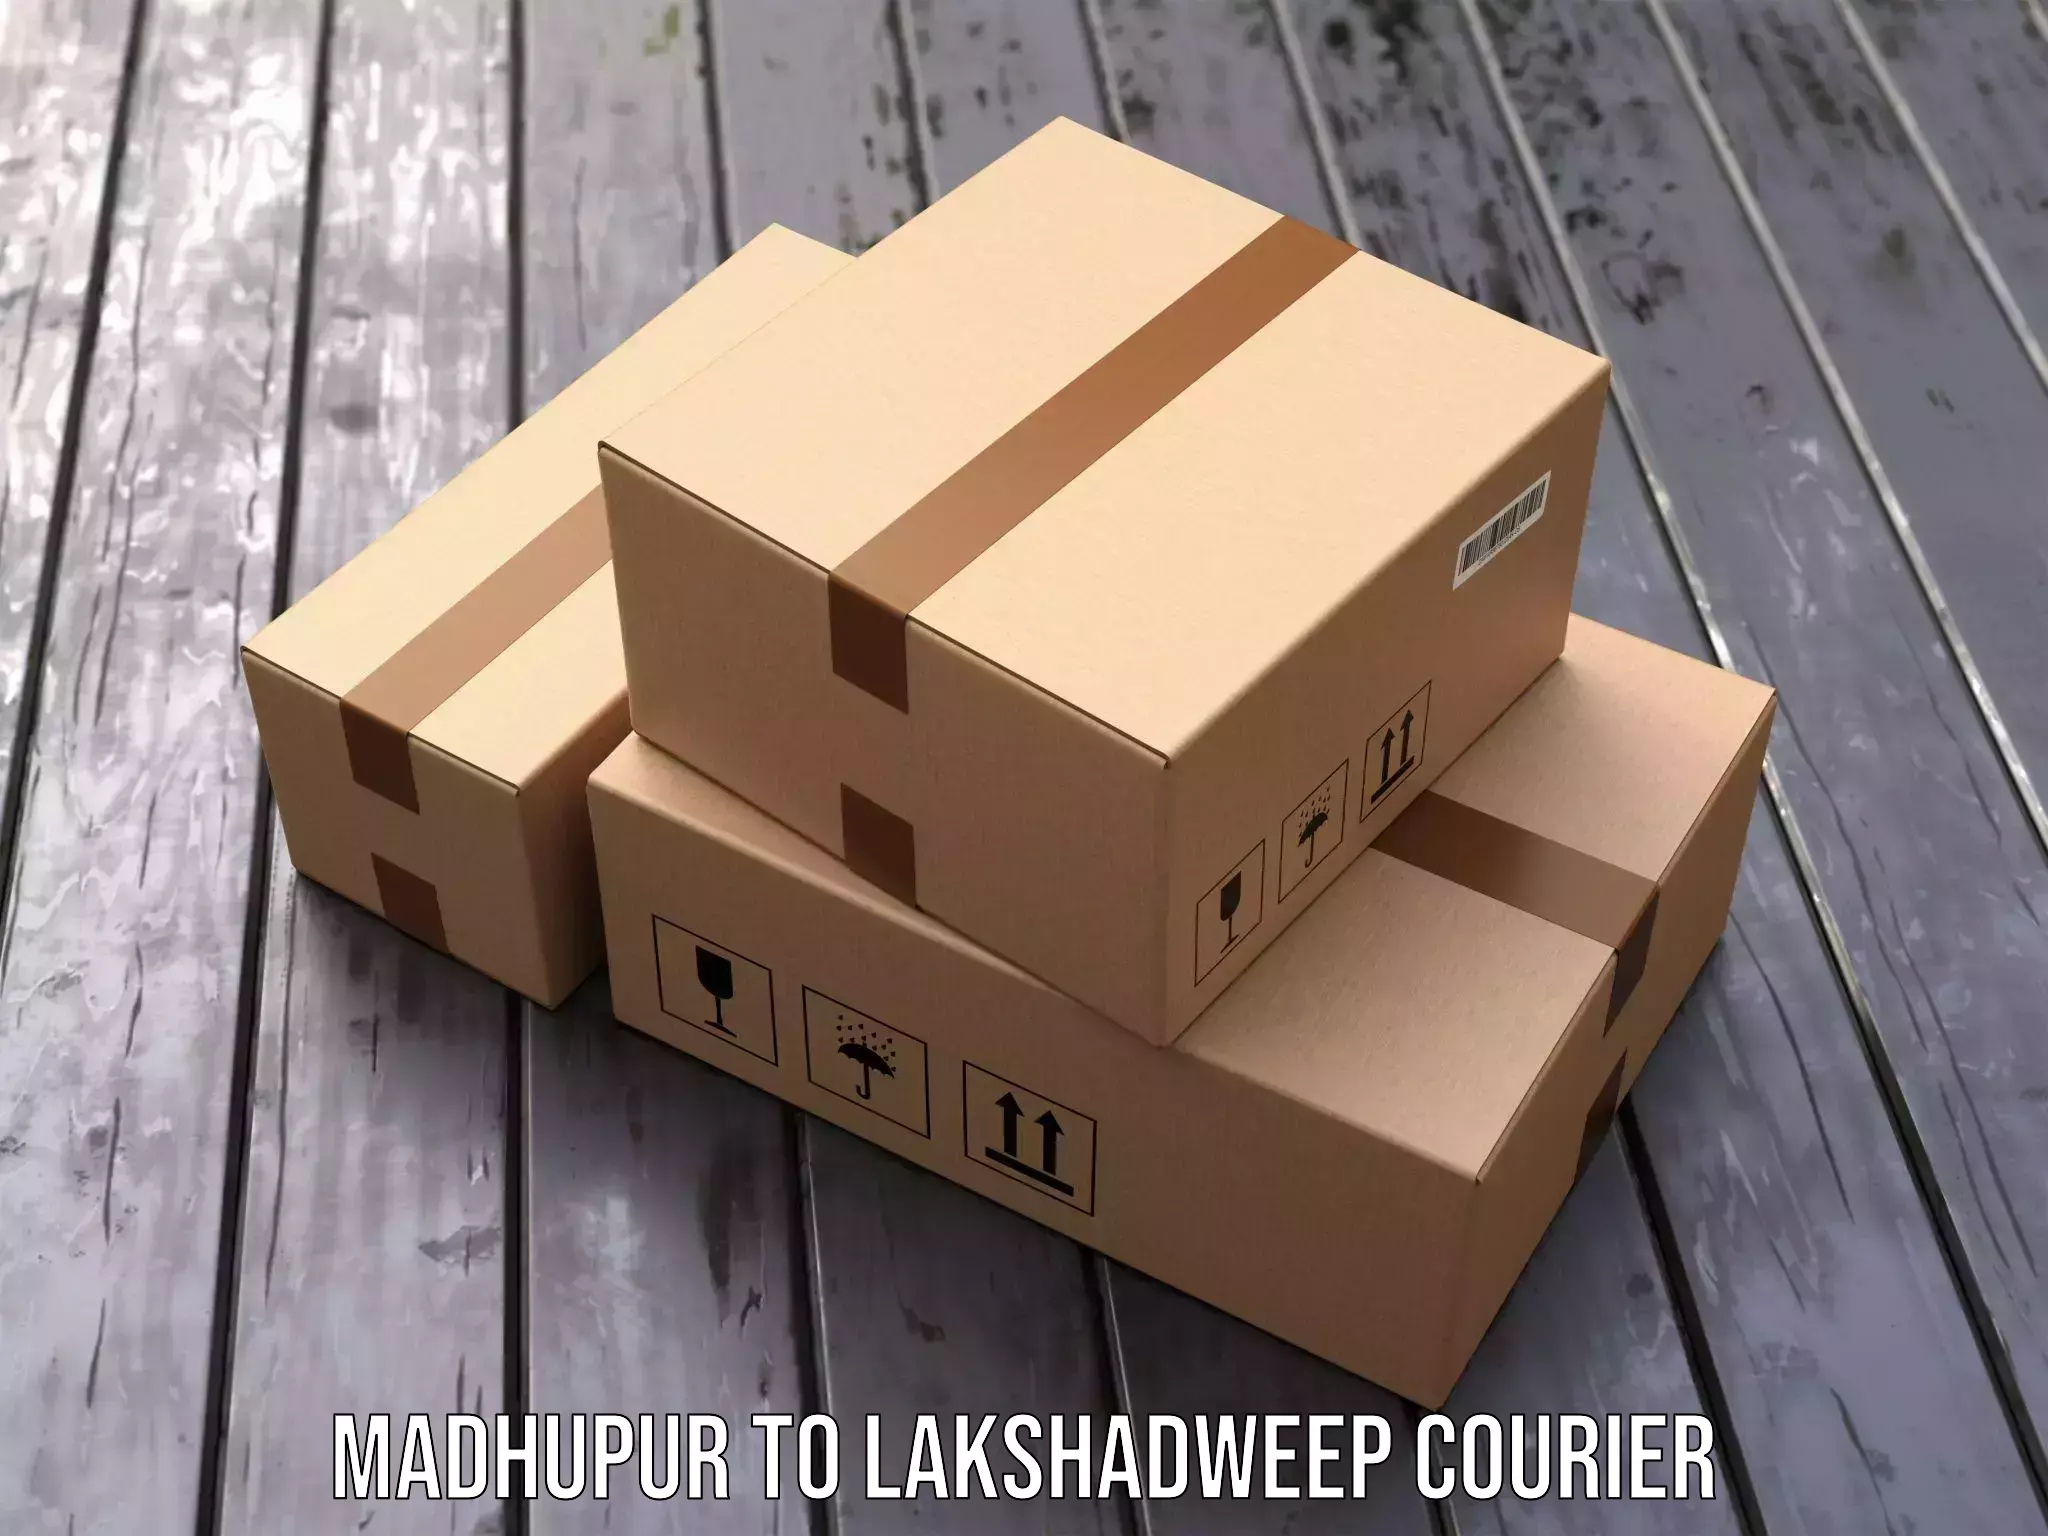 Courier service innovation Madhupur to Lakshadweep